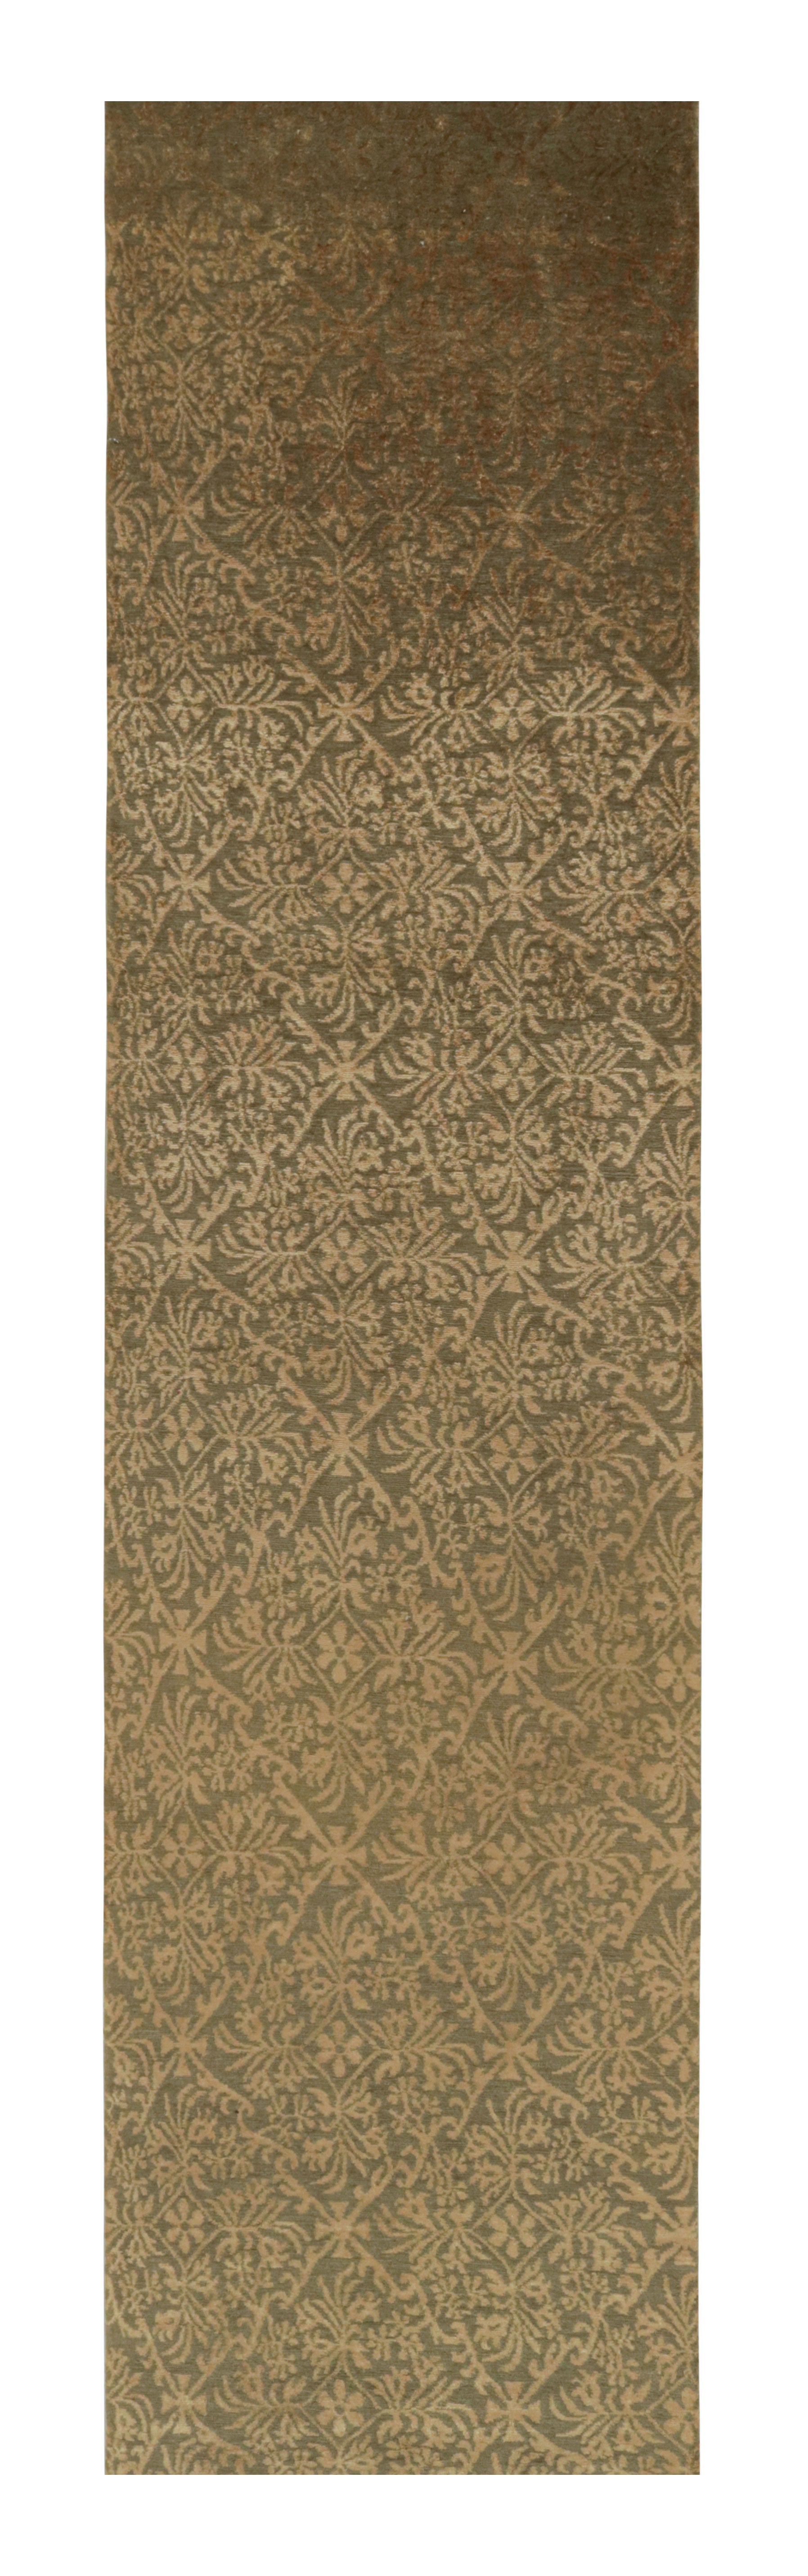 Rug & Kilim’s European Style Runner Rug in Green and Gold Florals “Cordoba” For Sale